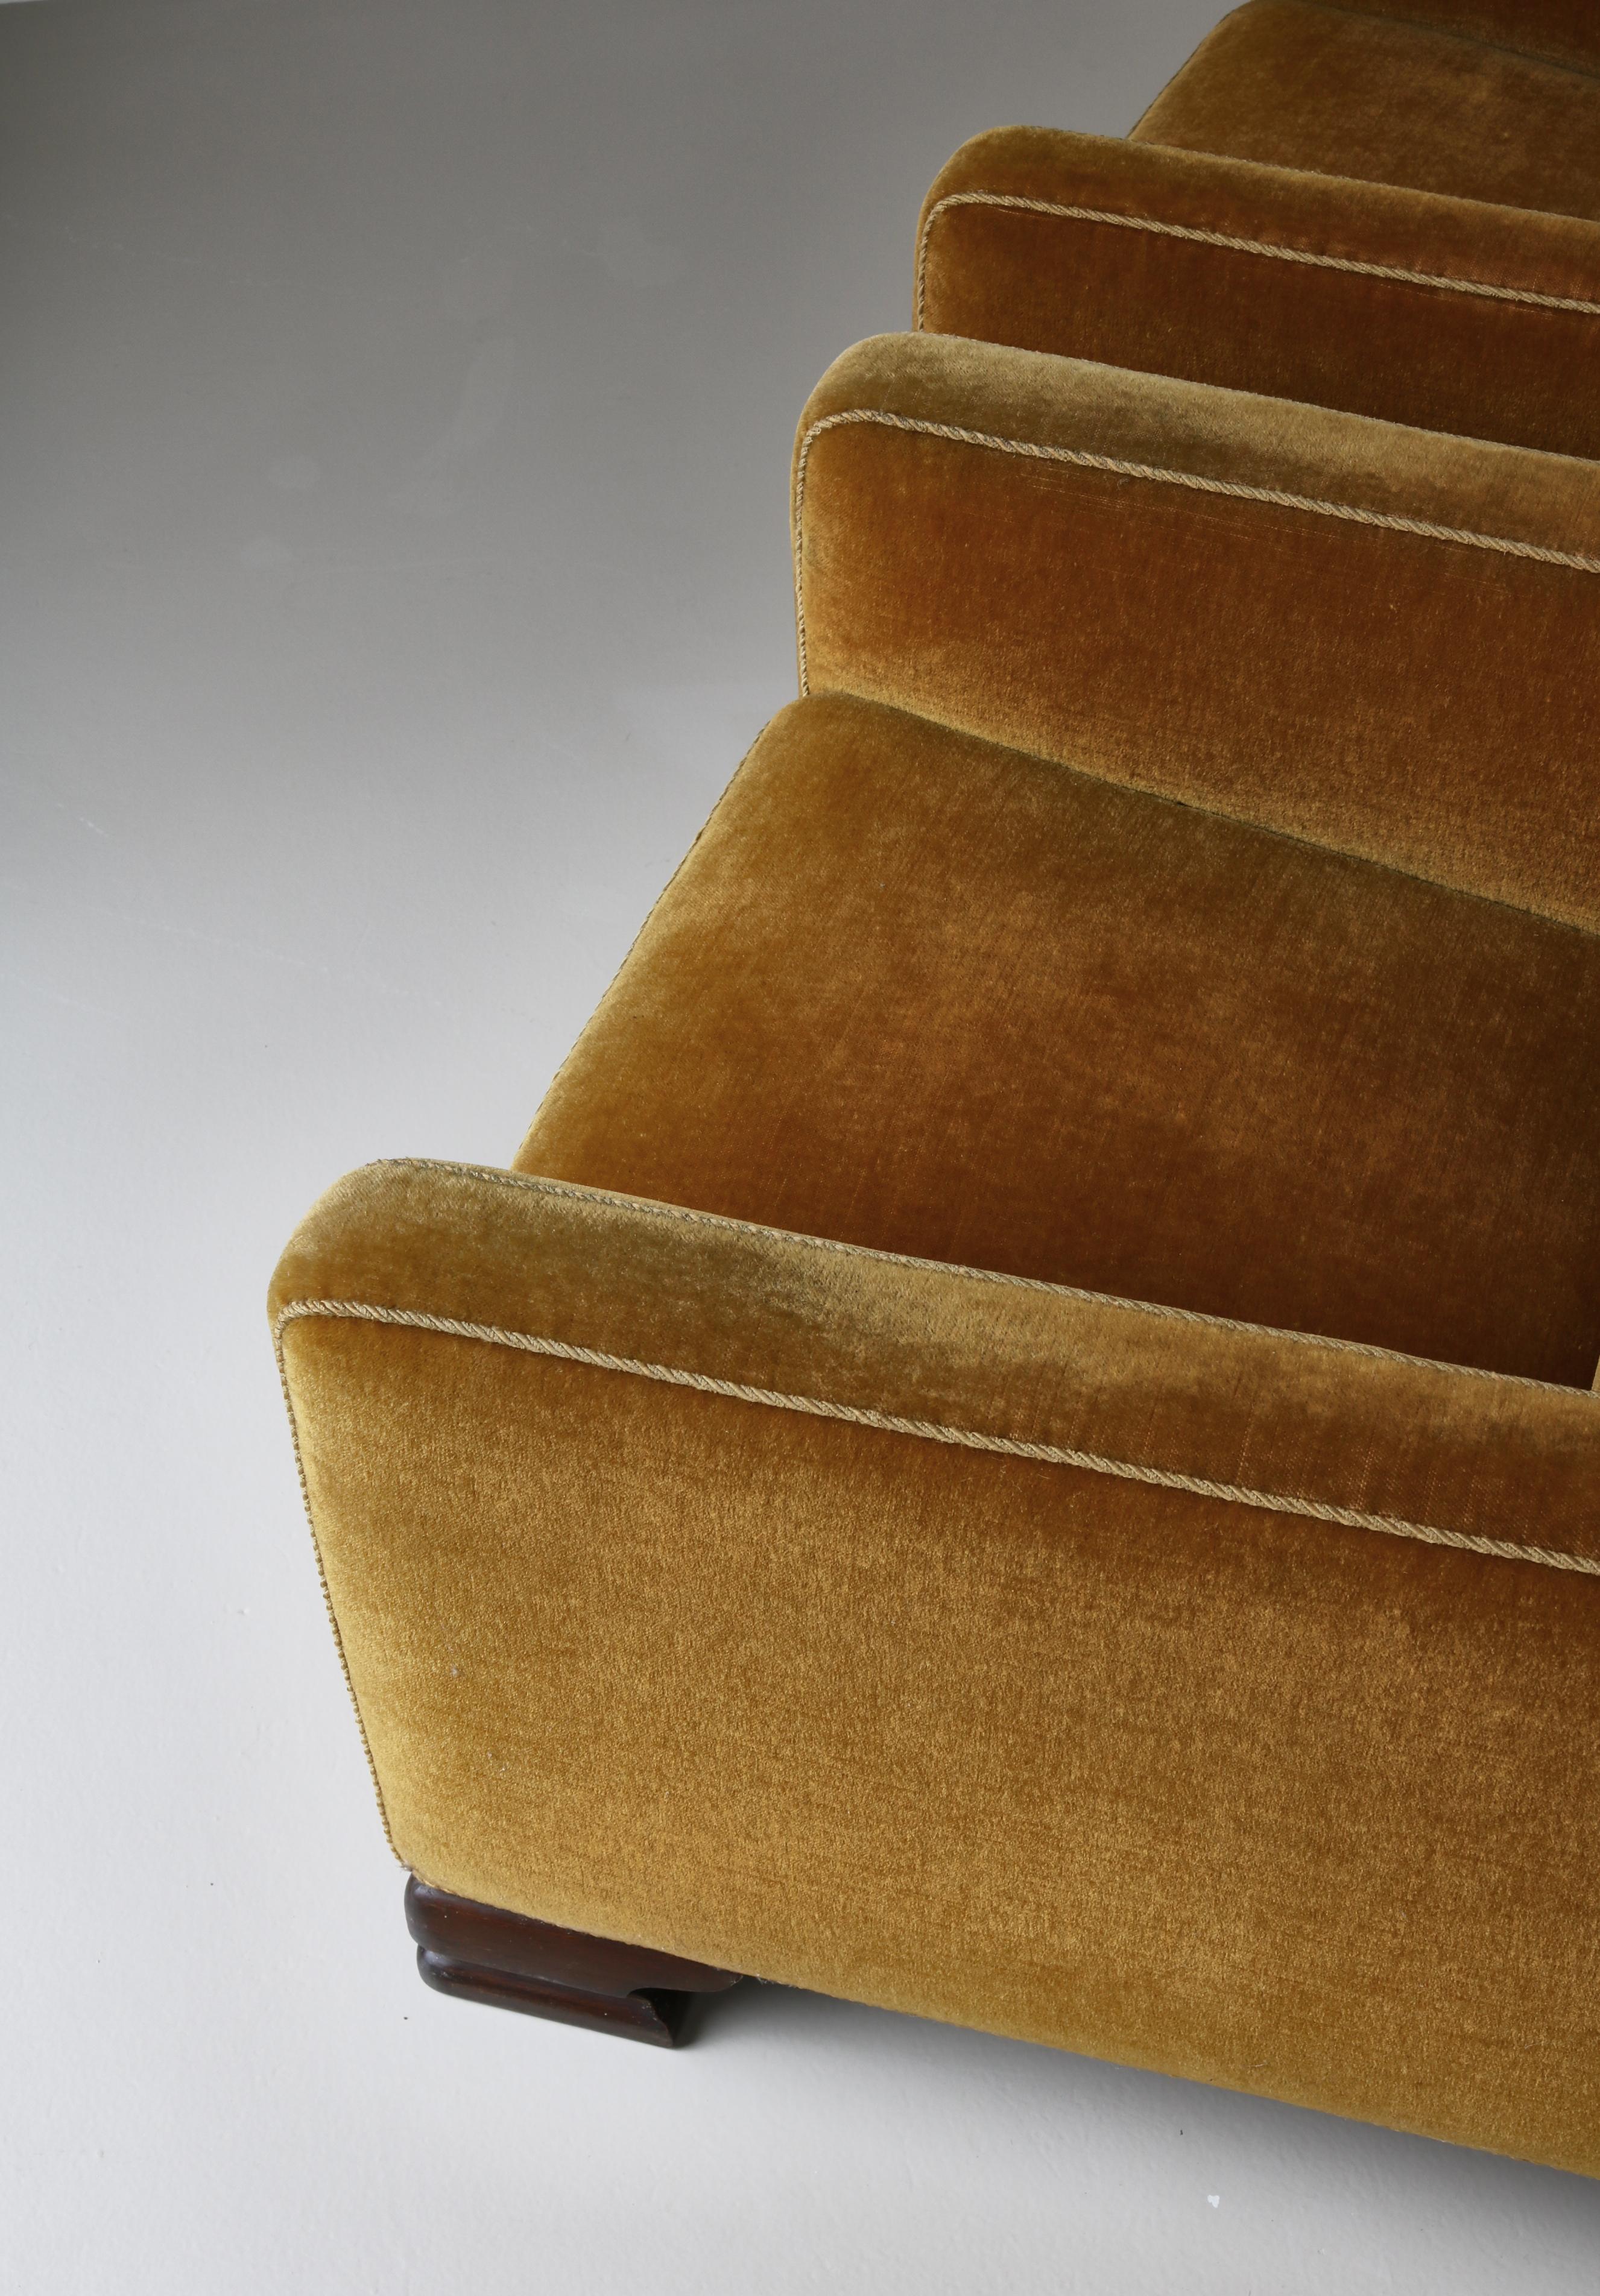 Pair of Danish Cabinetmaker Art Deco Lounge Chairs in Yellow Mohair, 1930s For Sale 12